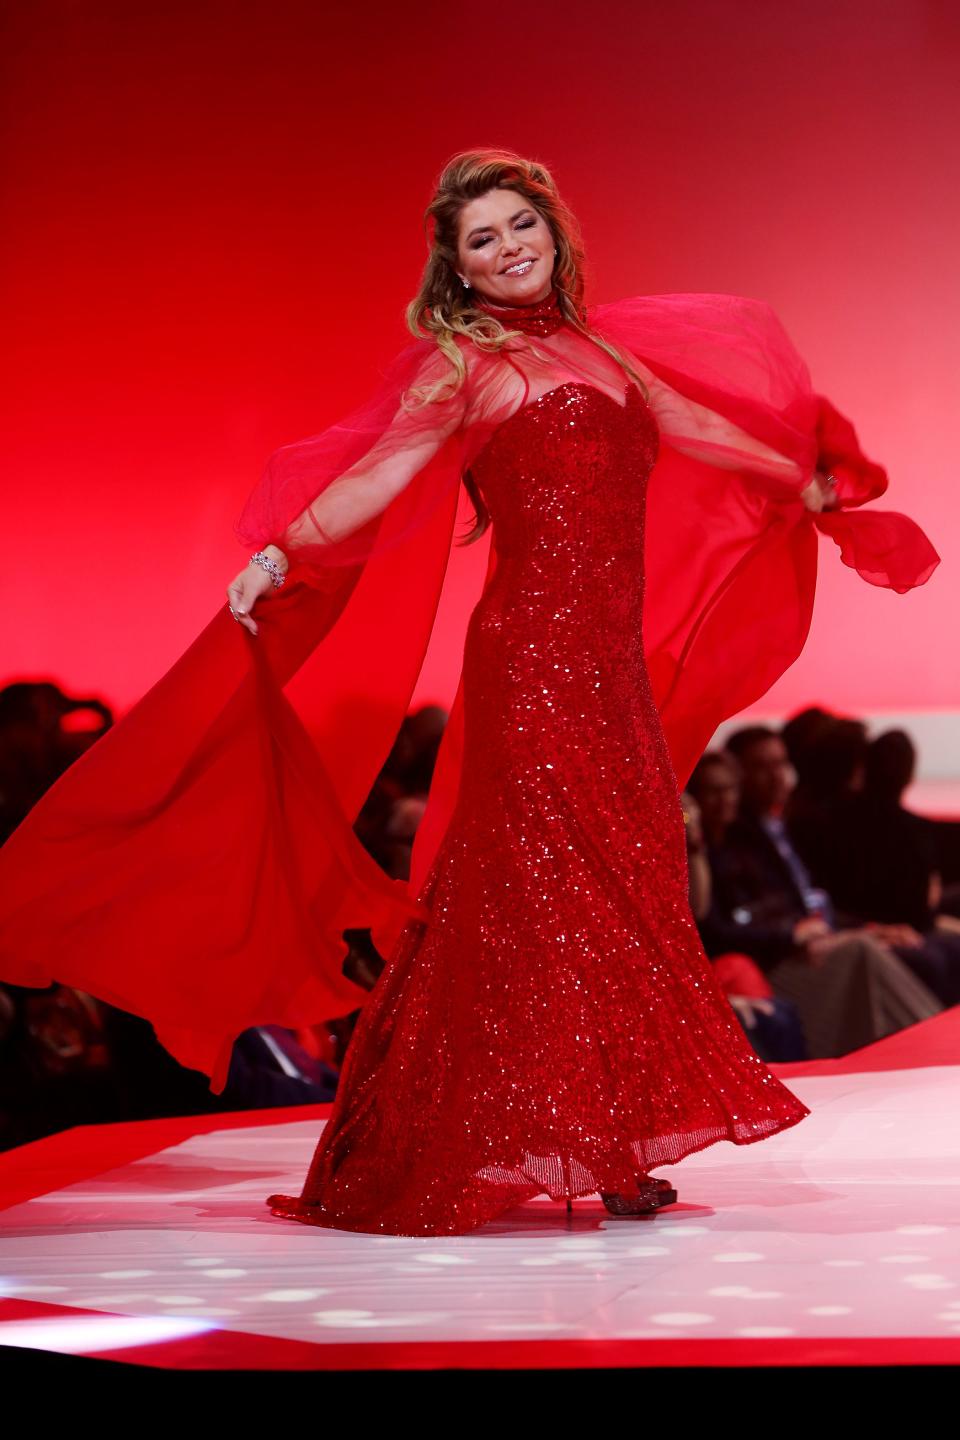 <span><span>Shania Twain at the AHA's Go Red for Women annual Red Dress Collection in 2020.</span><span>atrick Lewis/Starpix/Shutterstock</span></span>